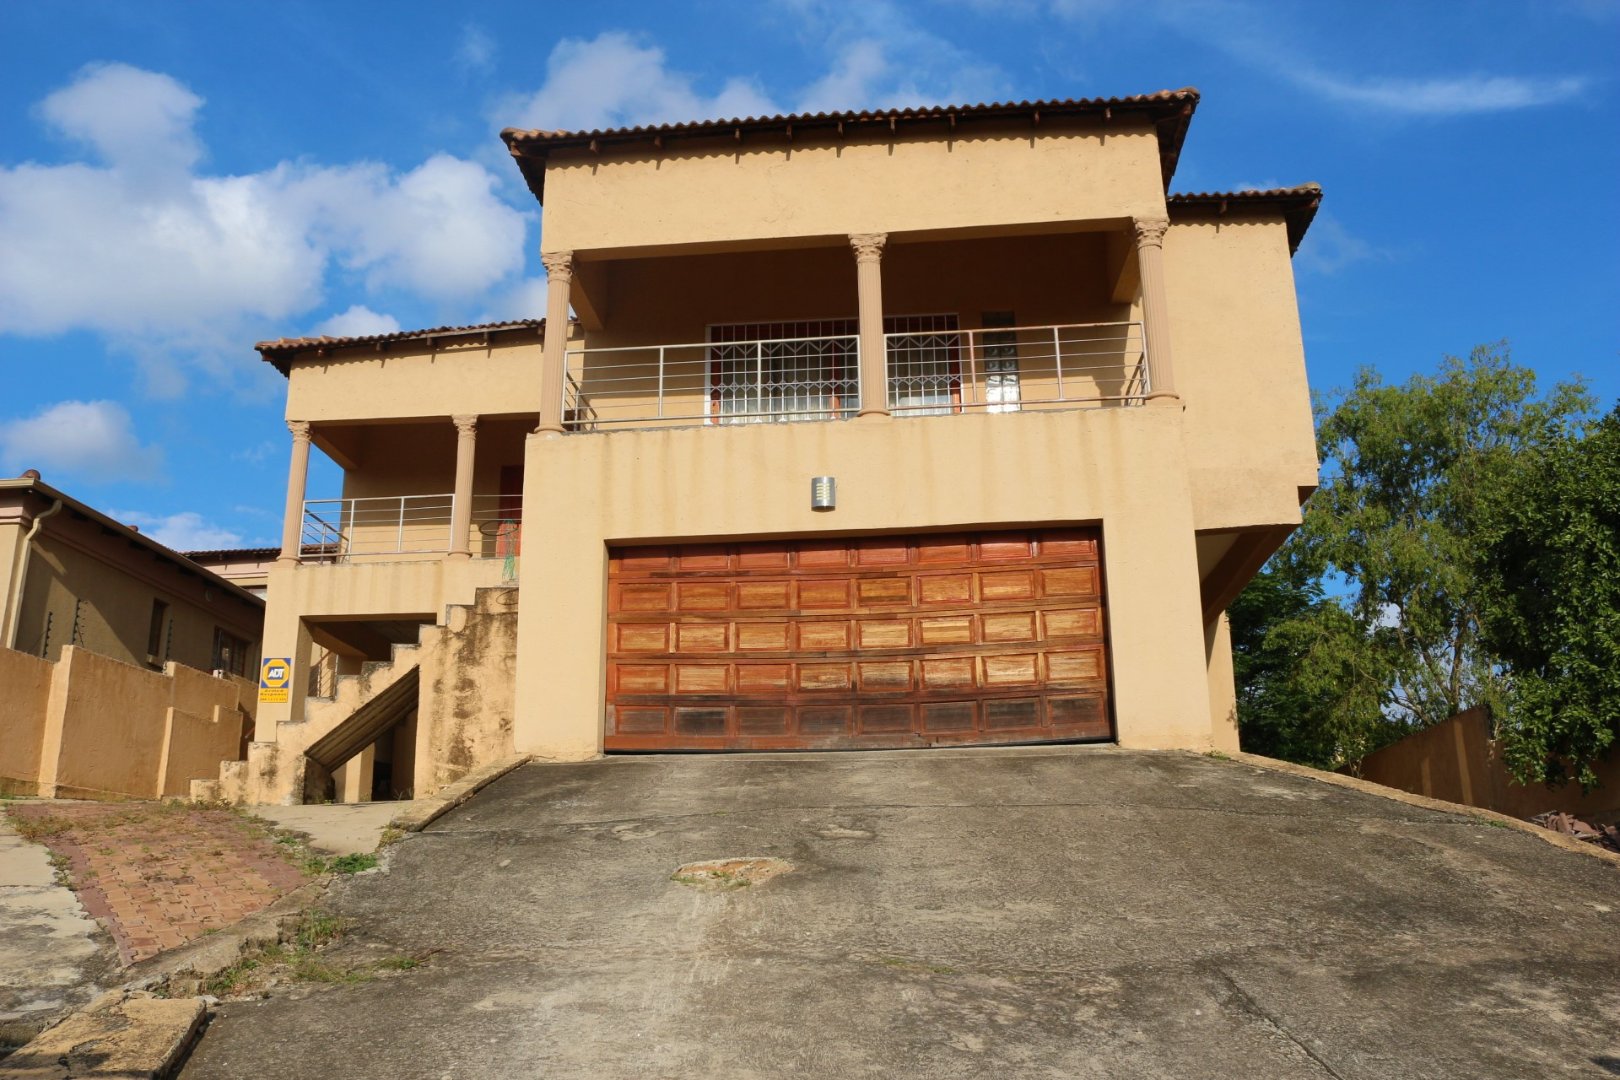 Realty 1 5 Bedroom House For Sale In Stonehenge Nelspruit